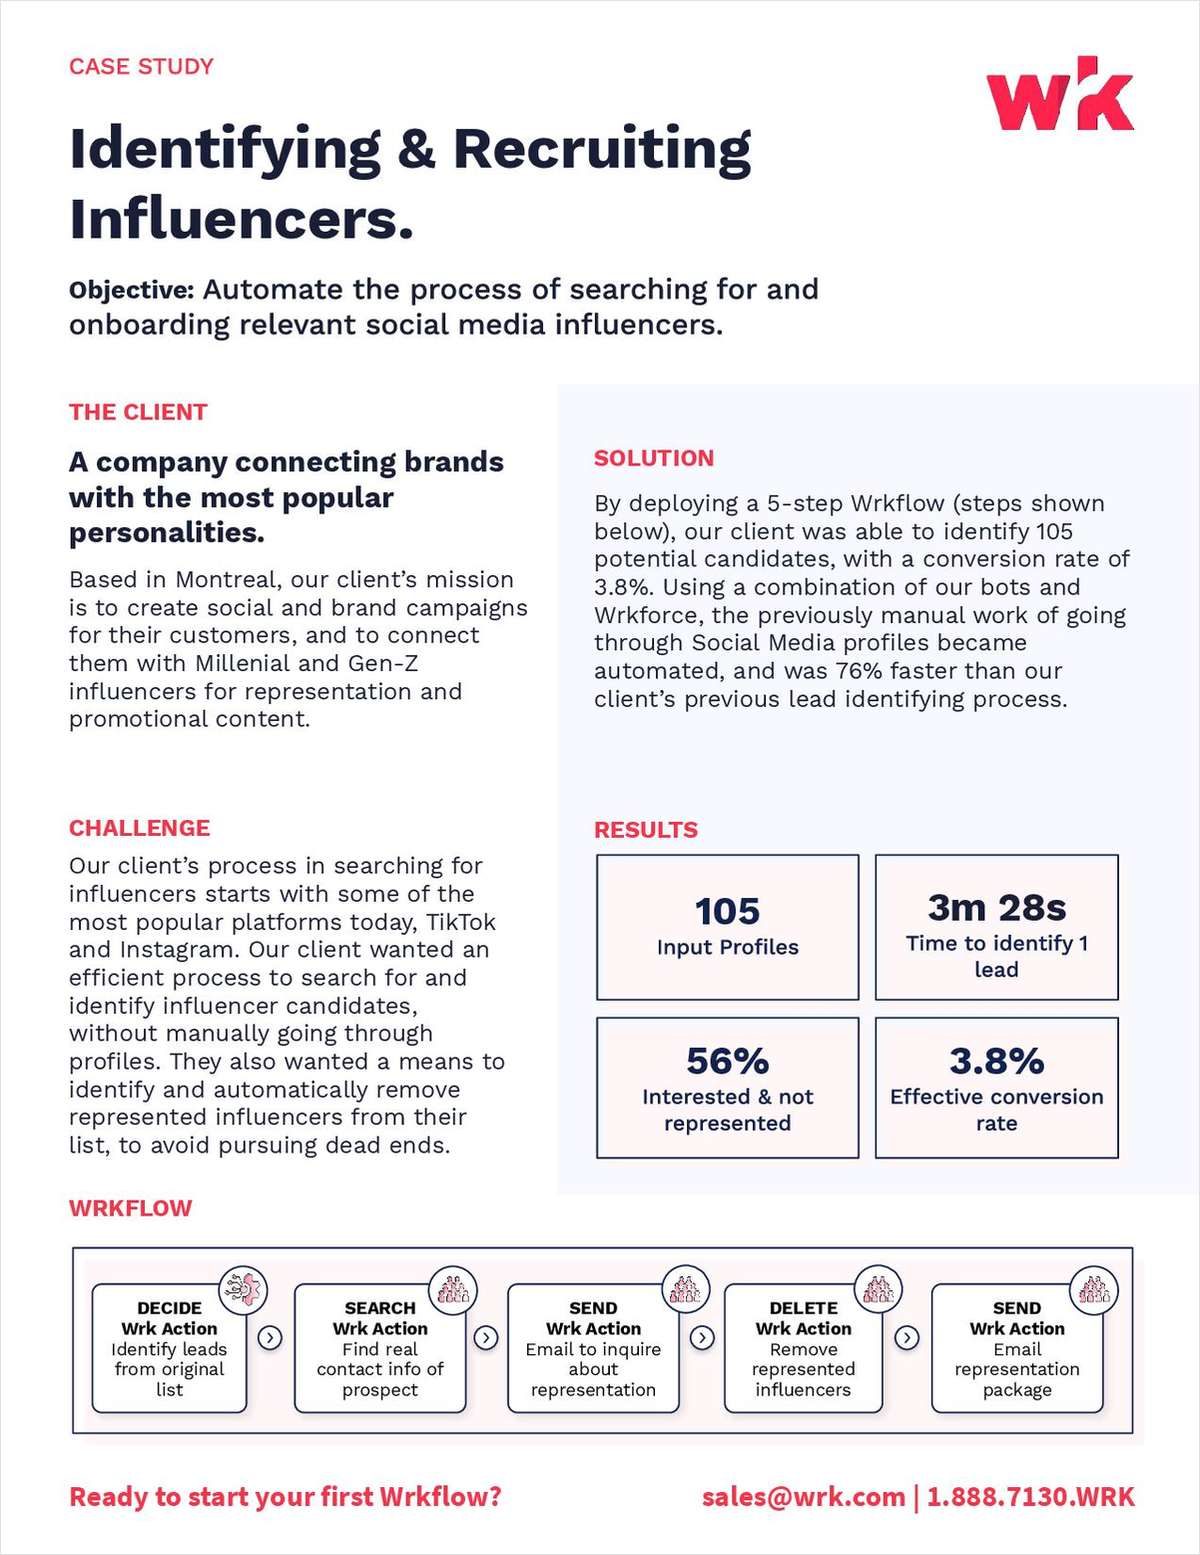 Identifying & Recruiting Influencers